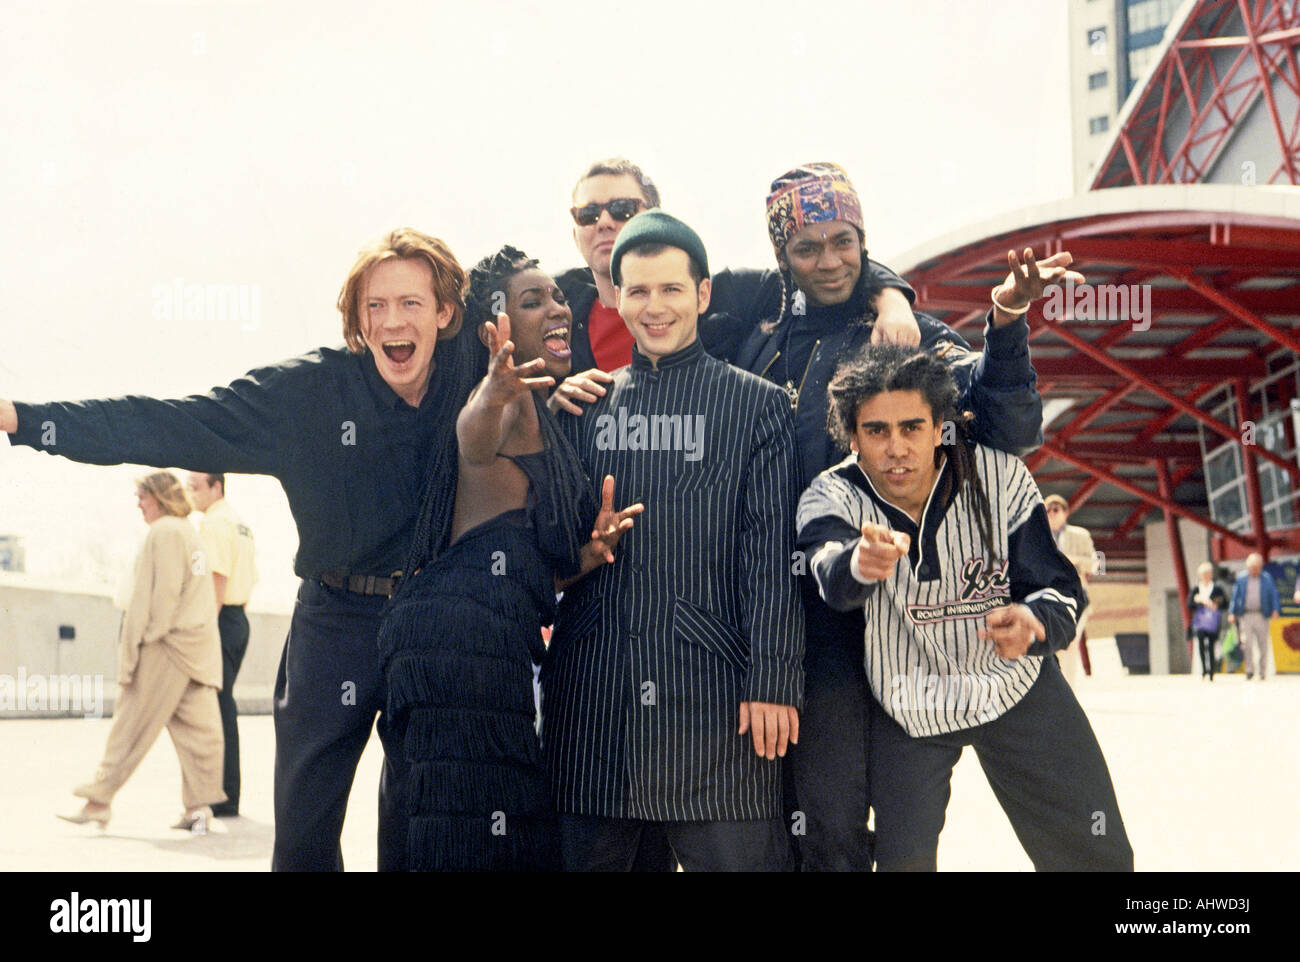 D REAM UK pop group about 1995 with Peter Cunnah in middle Stock Photo -  Alamy